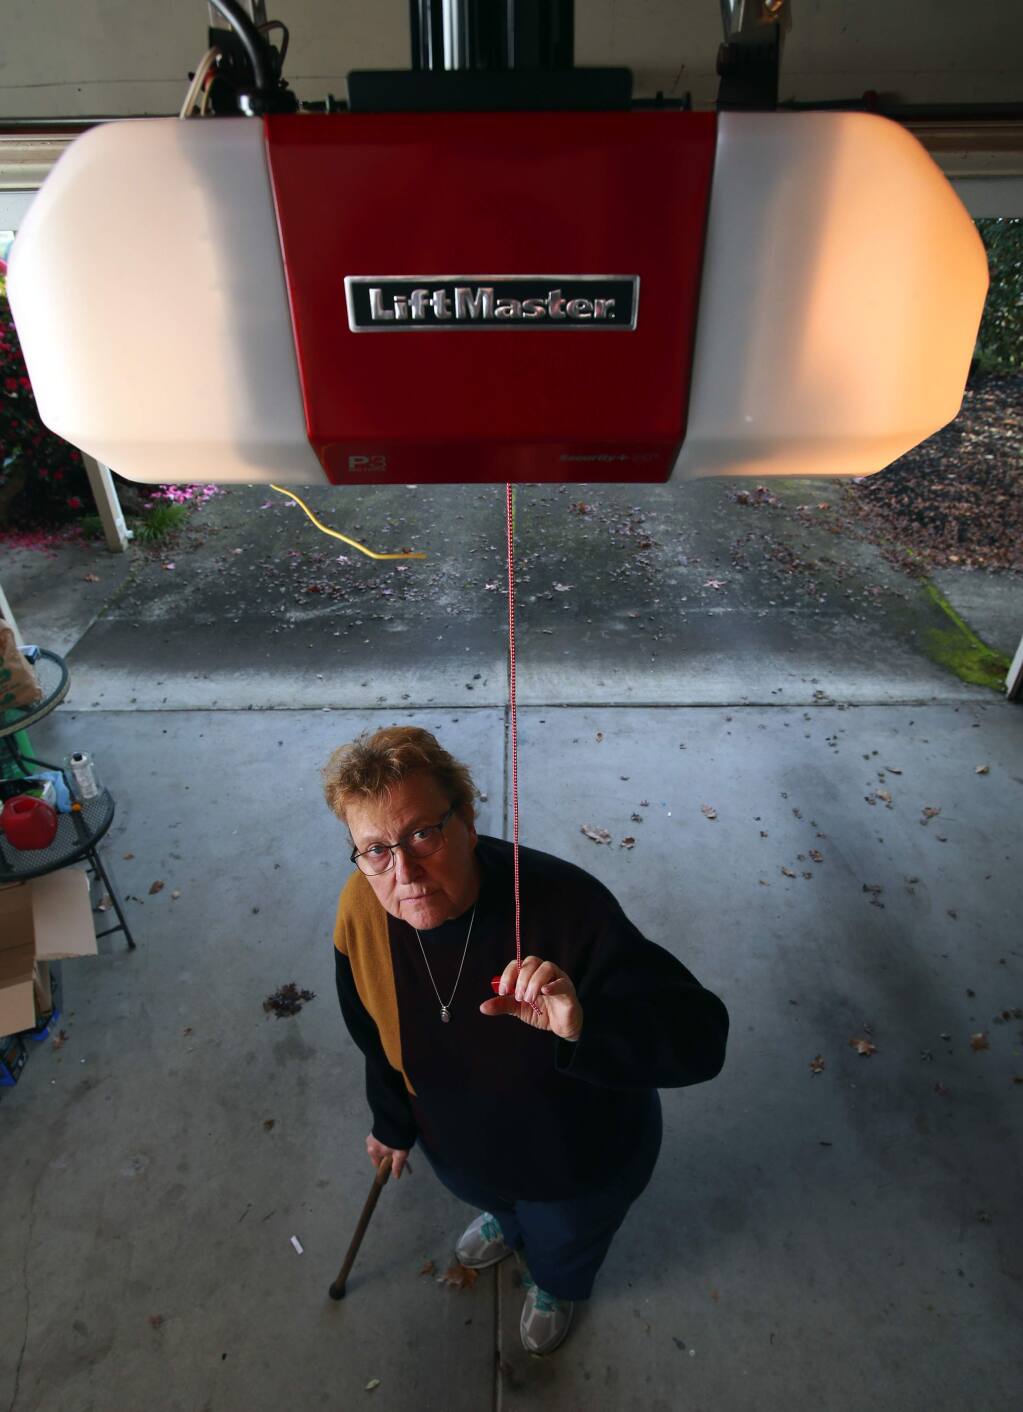 Oakmont resident Cheryl Diehm installed a backup battery to operate her garage door opener after she was unable to open her the door manually on the night of the fires. Diehm knew to pull the release latch but was unable to lift the heavy door when told to evacuate. (photo by John Burgess/The Press Democrat)